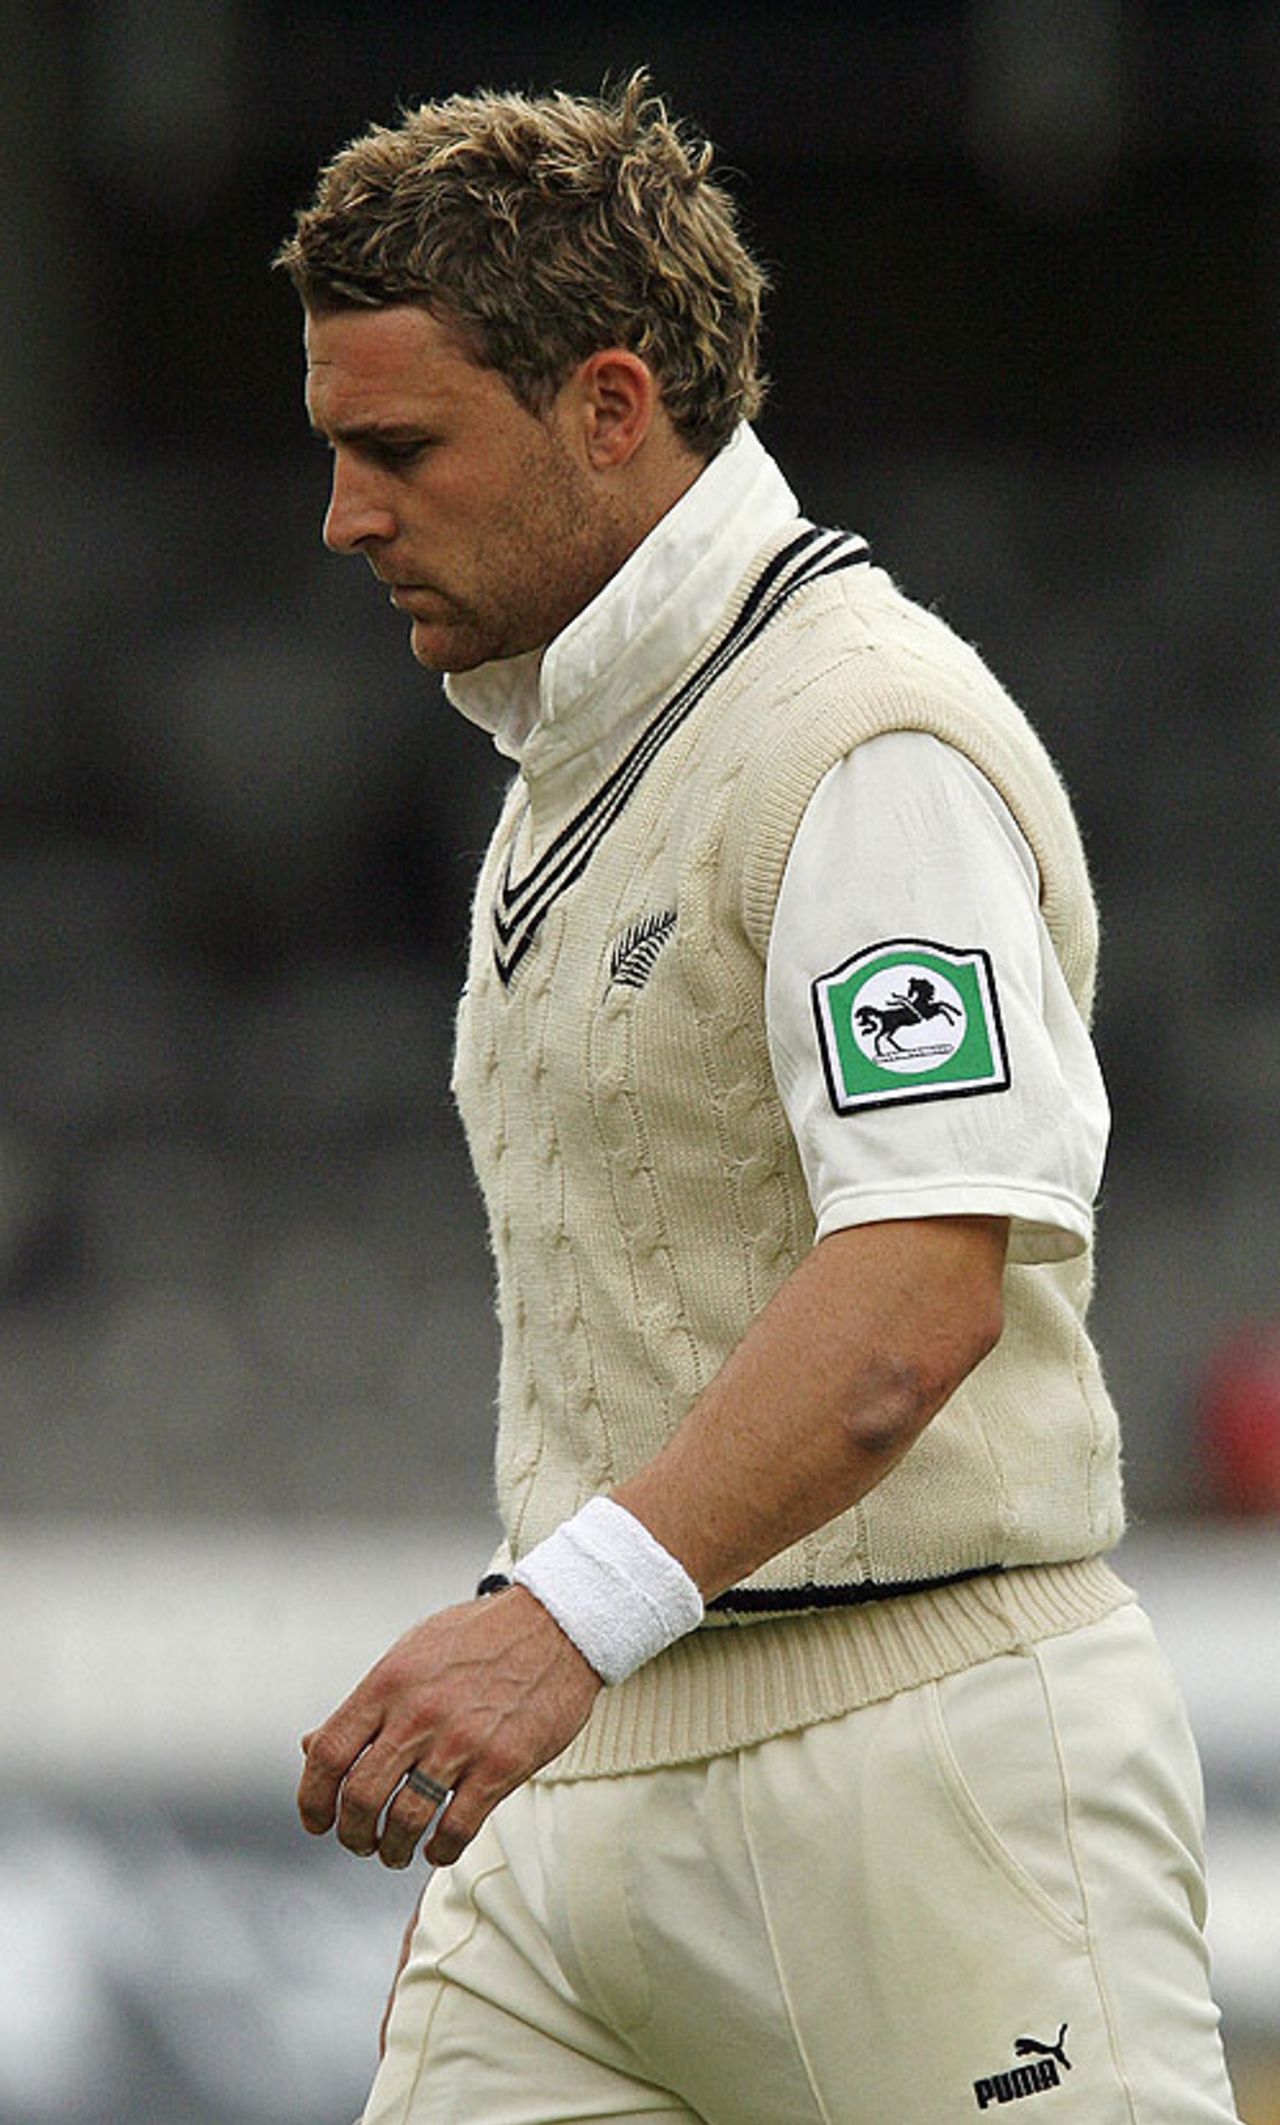 Brendon McCullum walks off after retiring hurt with an ugly lump on his left arm, England v New Zealand, 1st Test, Lord's, May 19, 2008